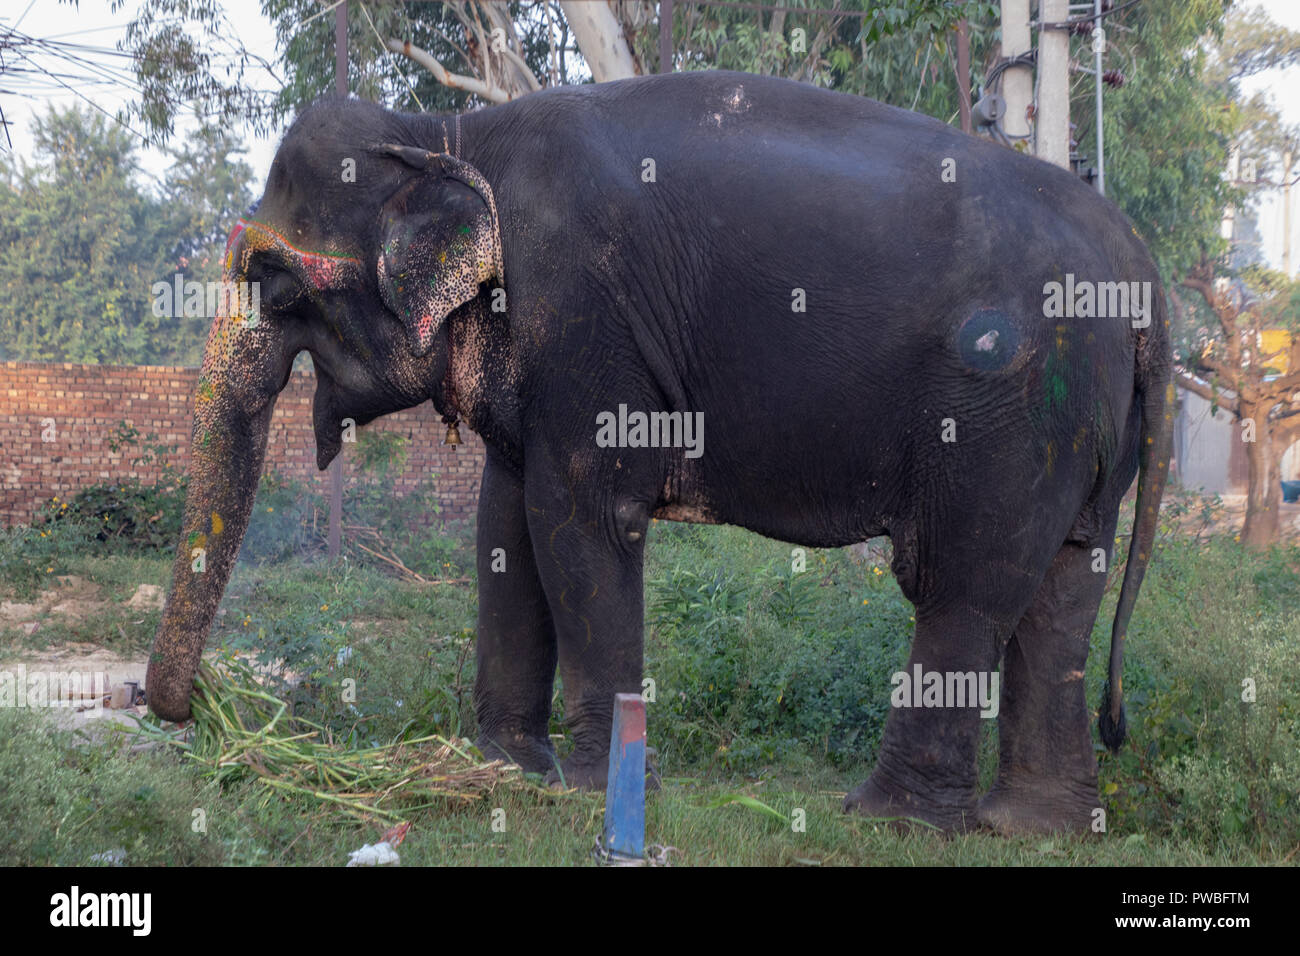 Nakodar, Panjab, India. 15th Oct, 2018. Morning street scenes in north Panjab market town of Nakodar. Morning walk for Indian elephant at street scrossing. There are reported to be about 20 working elephants in Panjab many based in Ludhiana but then moved to rural areas for participation in marriage and religious ceremonies as well as collecting alms. Credit: WansfordPhoto/Alamy Live News Stock Photo